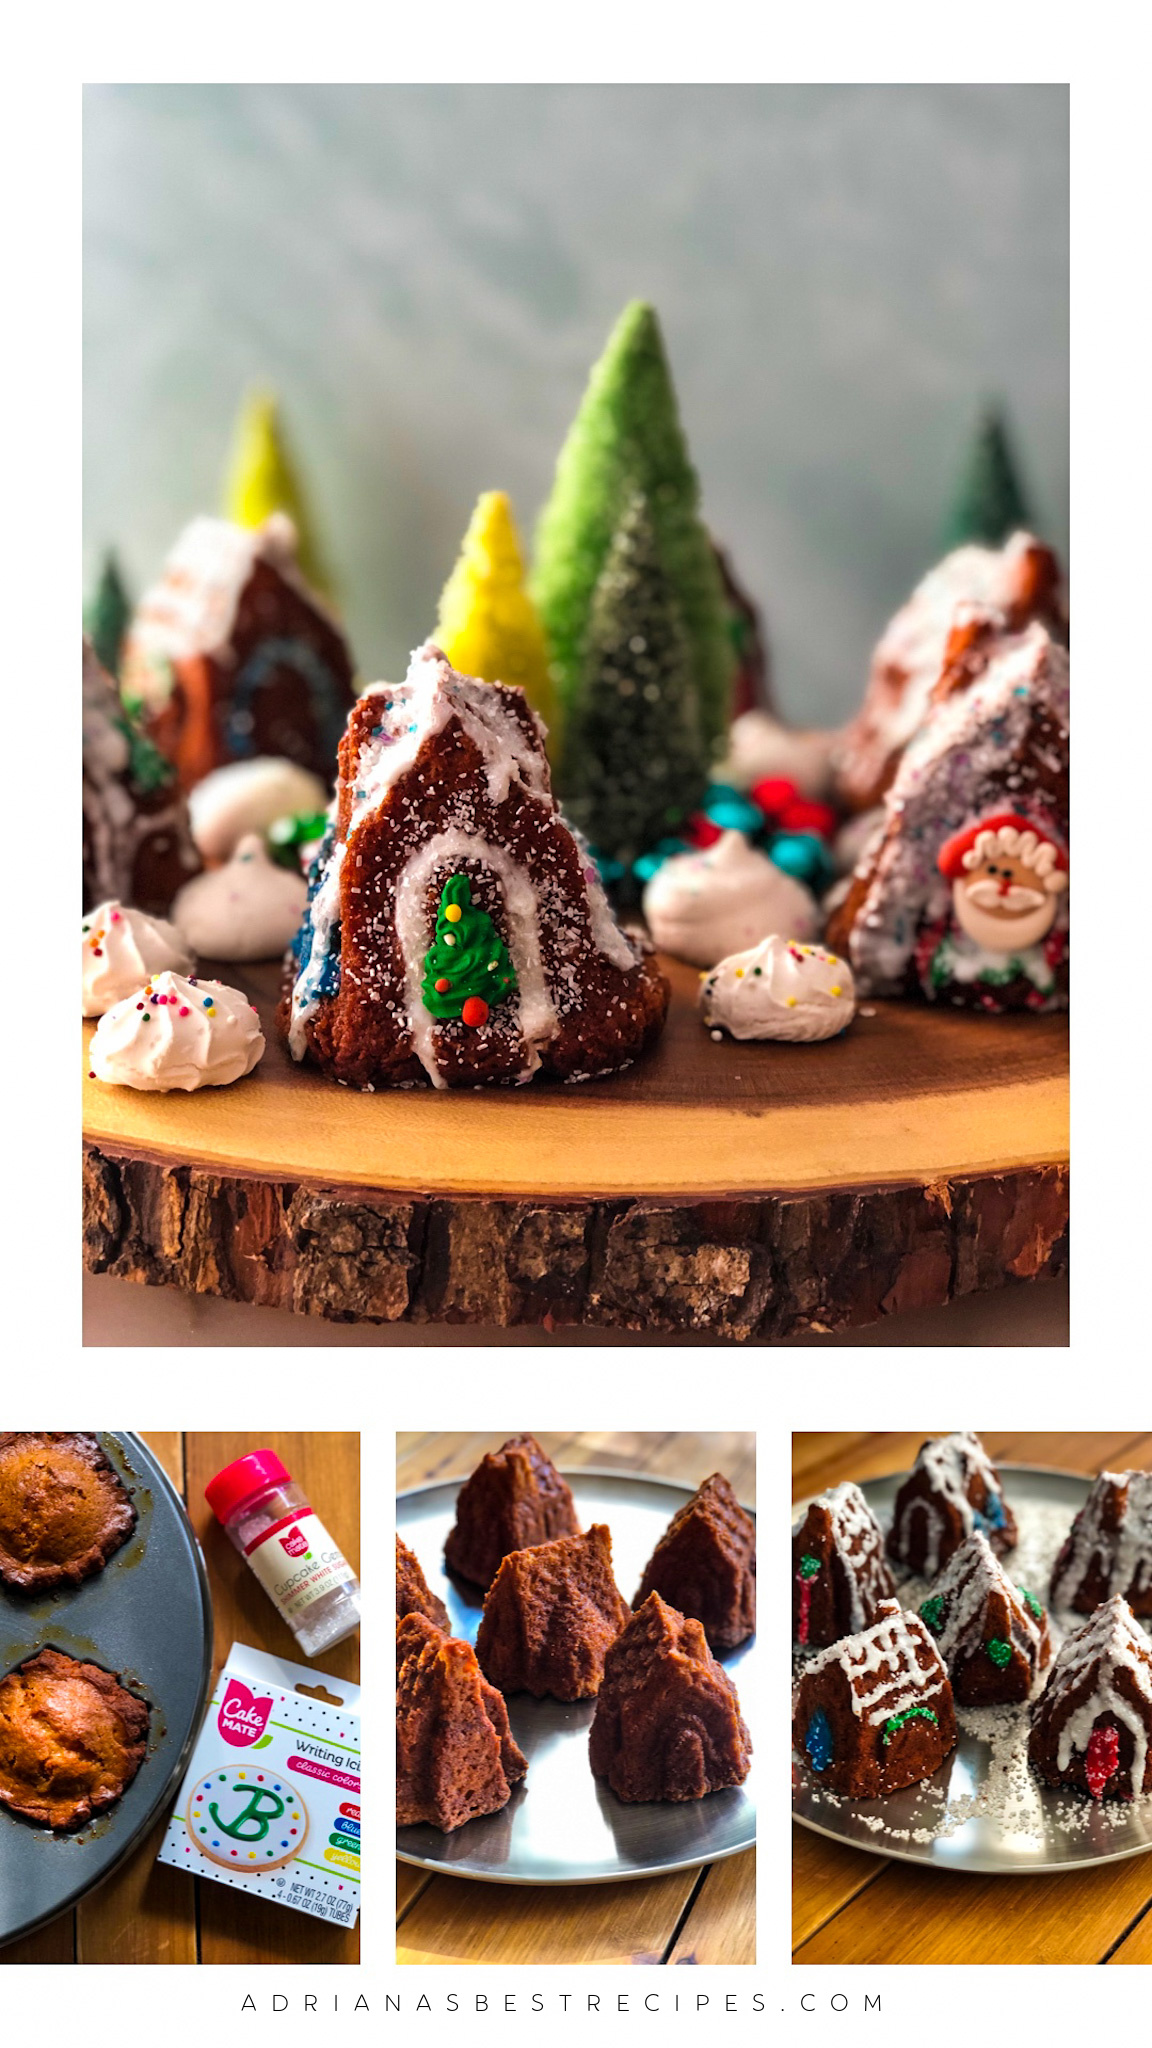 Collage on how to decorate the apple cupcakes and the final product showing an edible christmas village